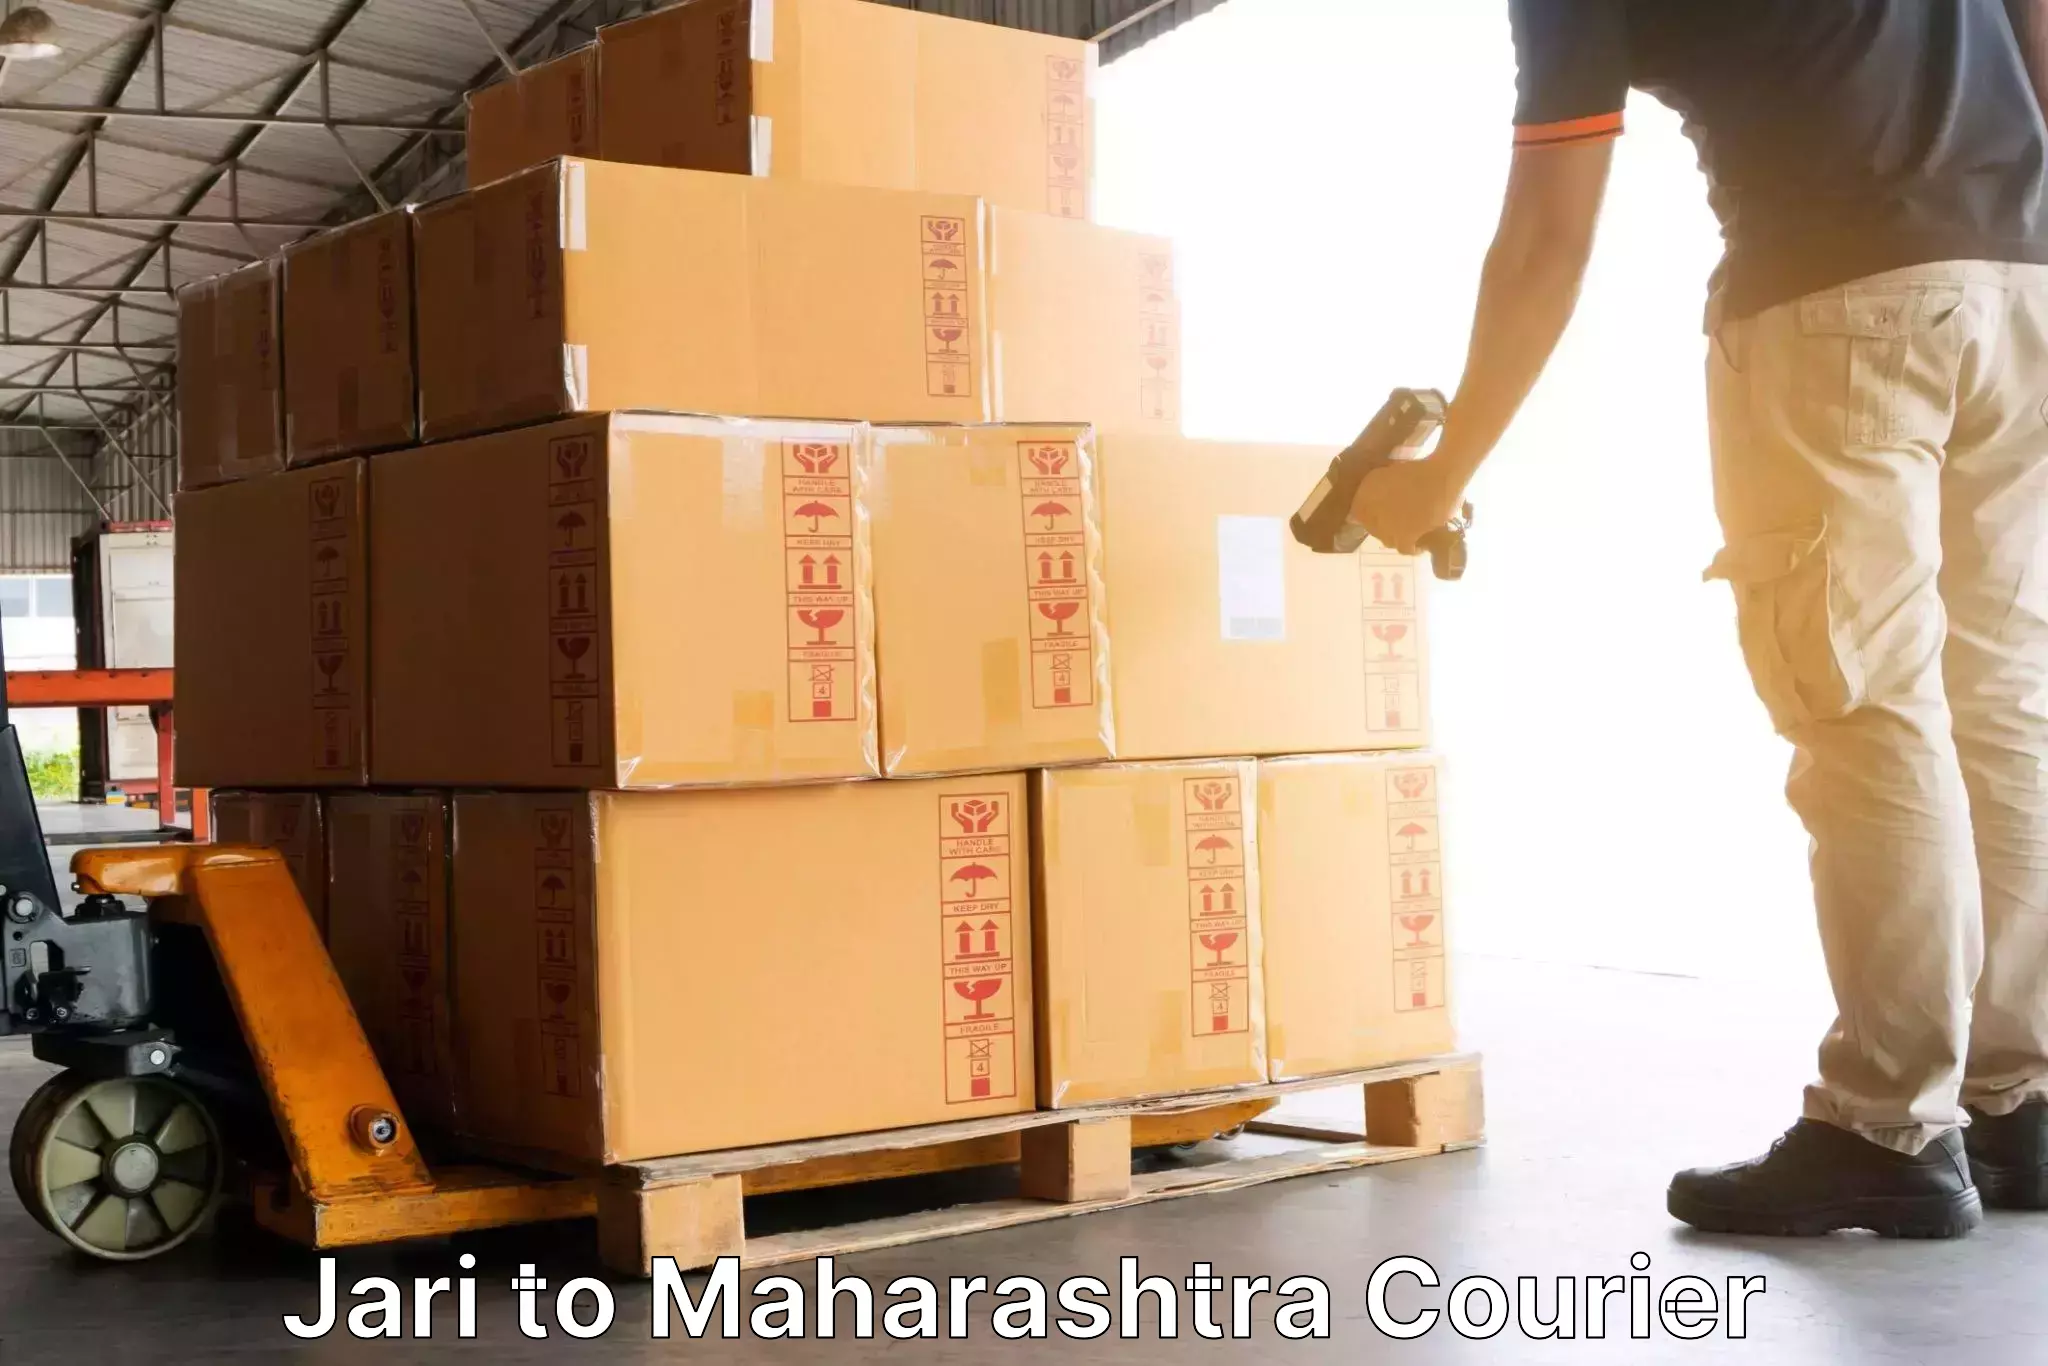 Courier service booking in Jari to Vaduj